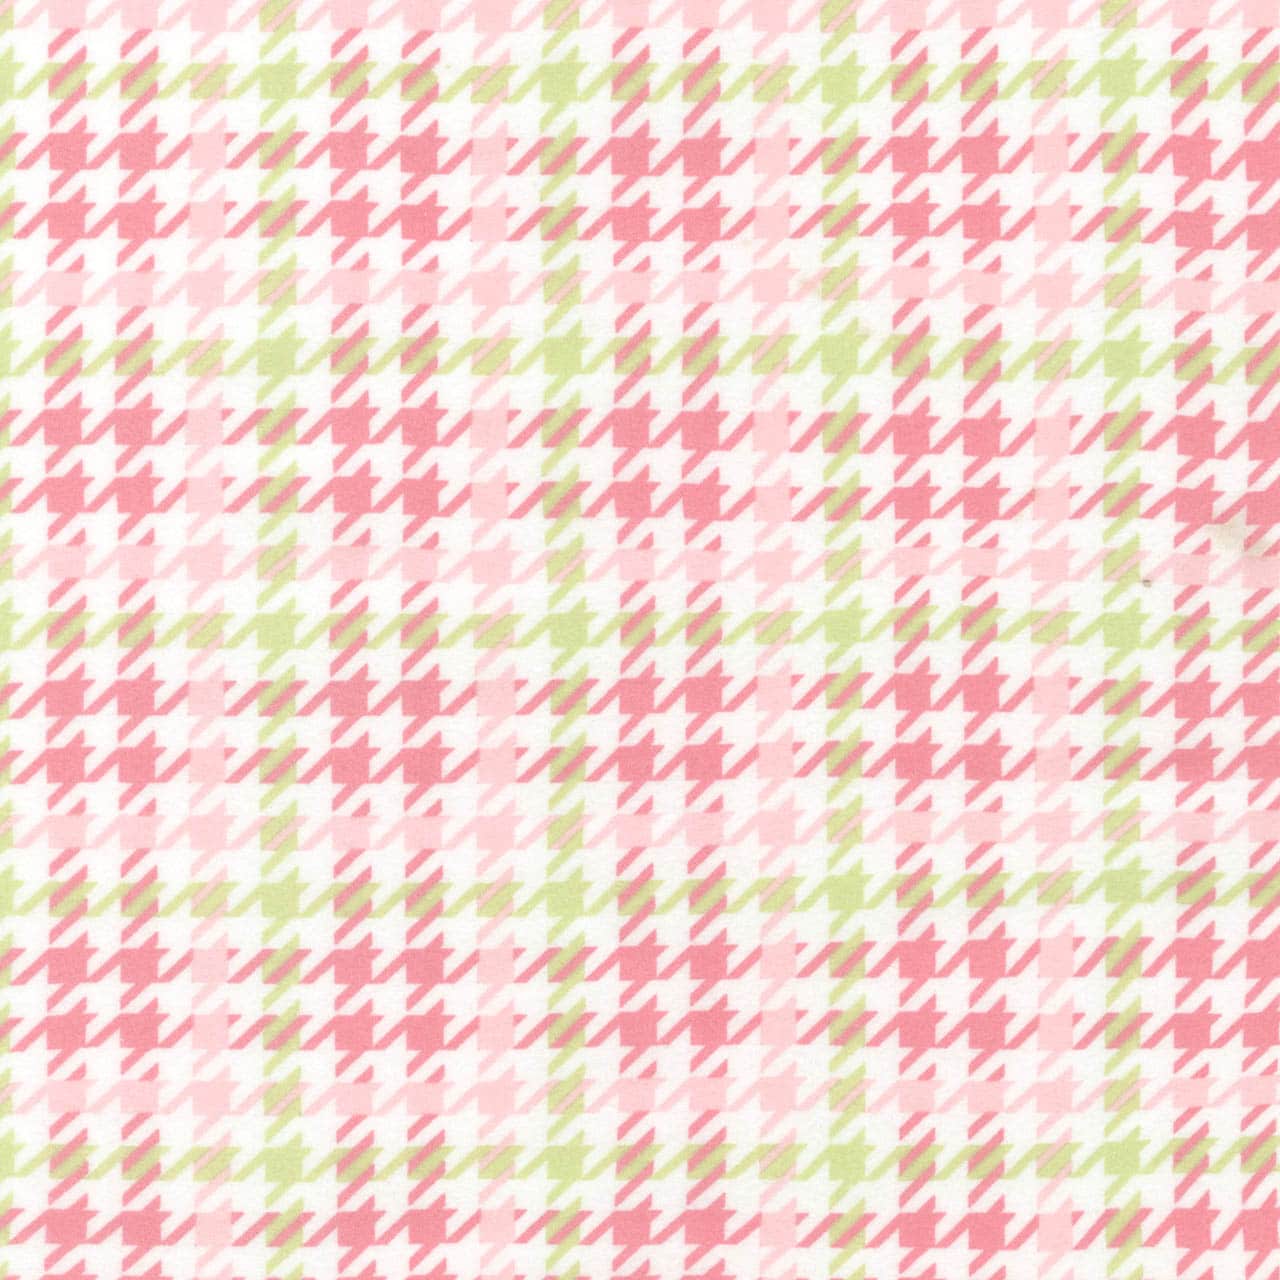 Polka dots on white brushed cotton flannel - Cozy Cotton - Robert Kaufman